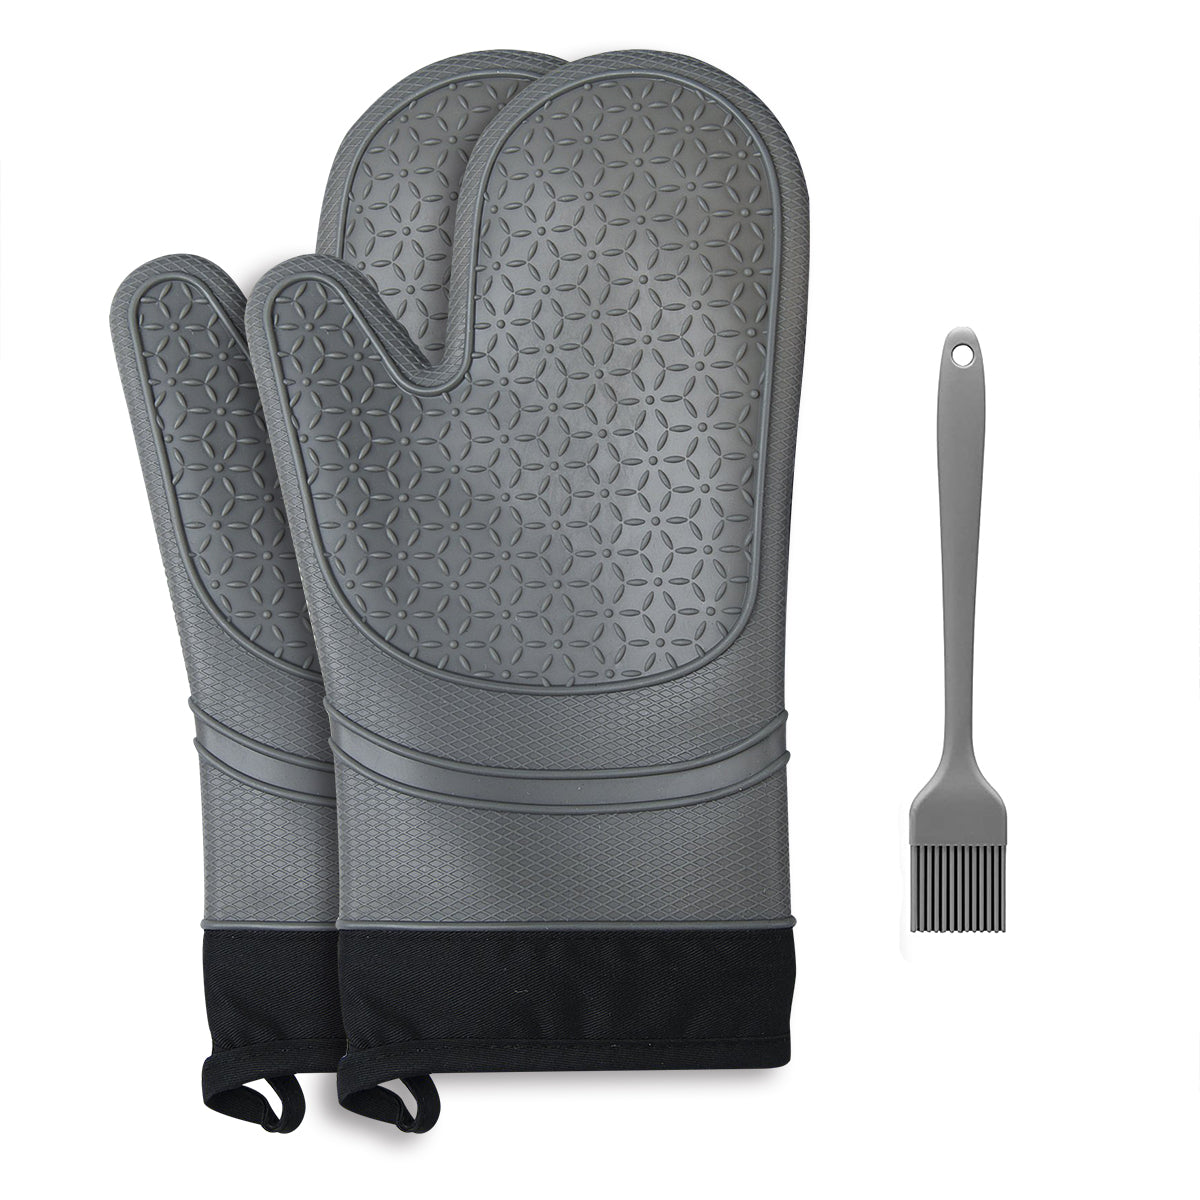 Oven Mitts 1 Pair - Silicone and Cotton Double -layer Heat Resistant Gloves  / Silicone BBQ Gloves - Perfect